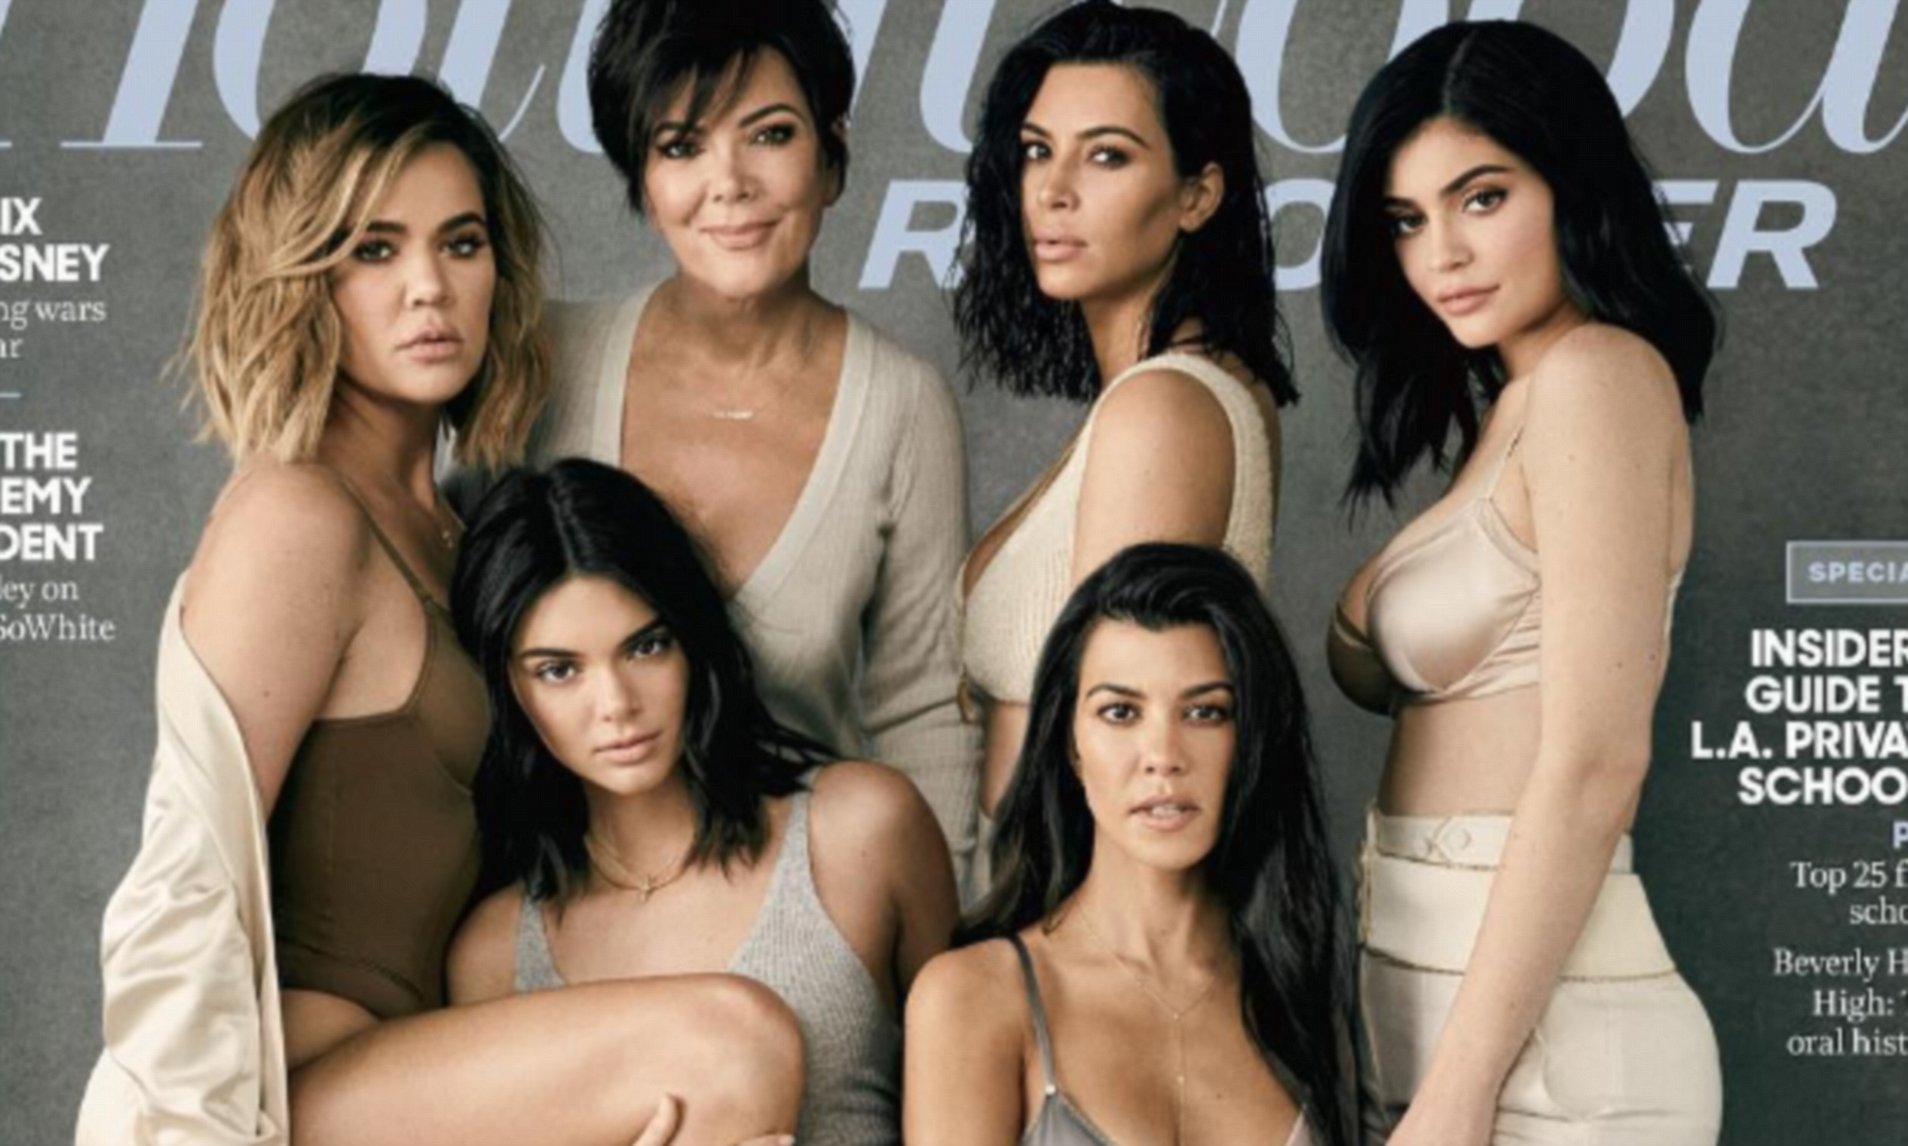 amy caldwell recommends the kardashian girls naked pic